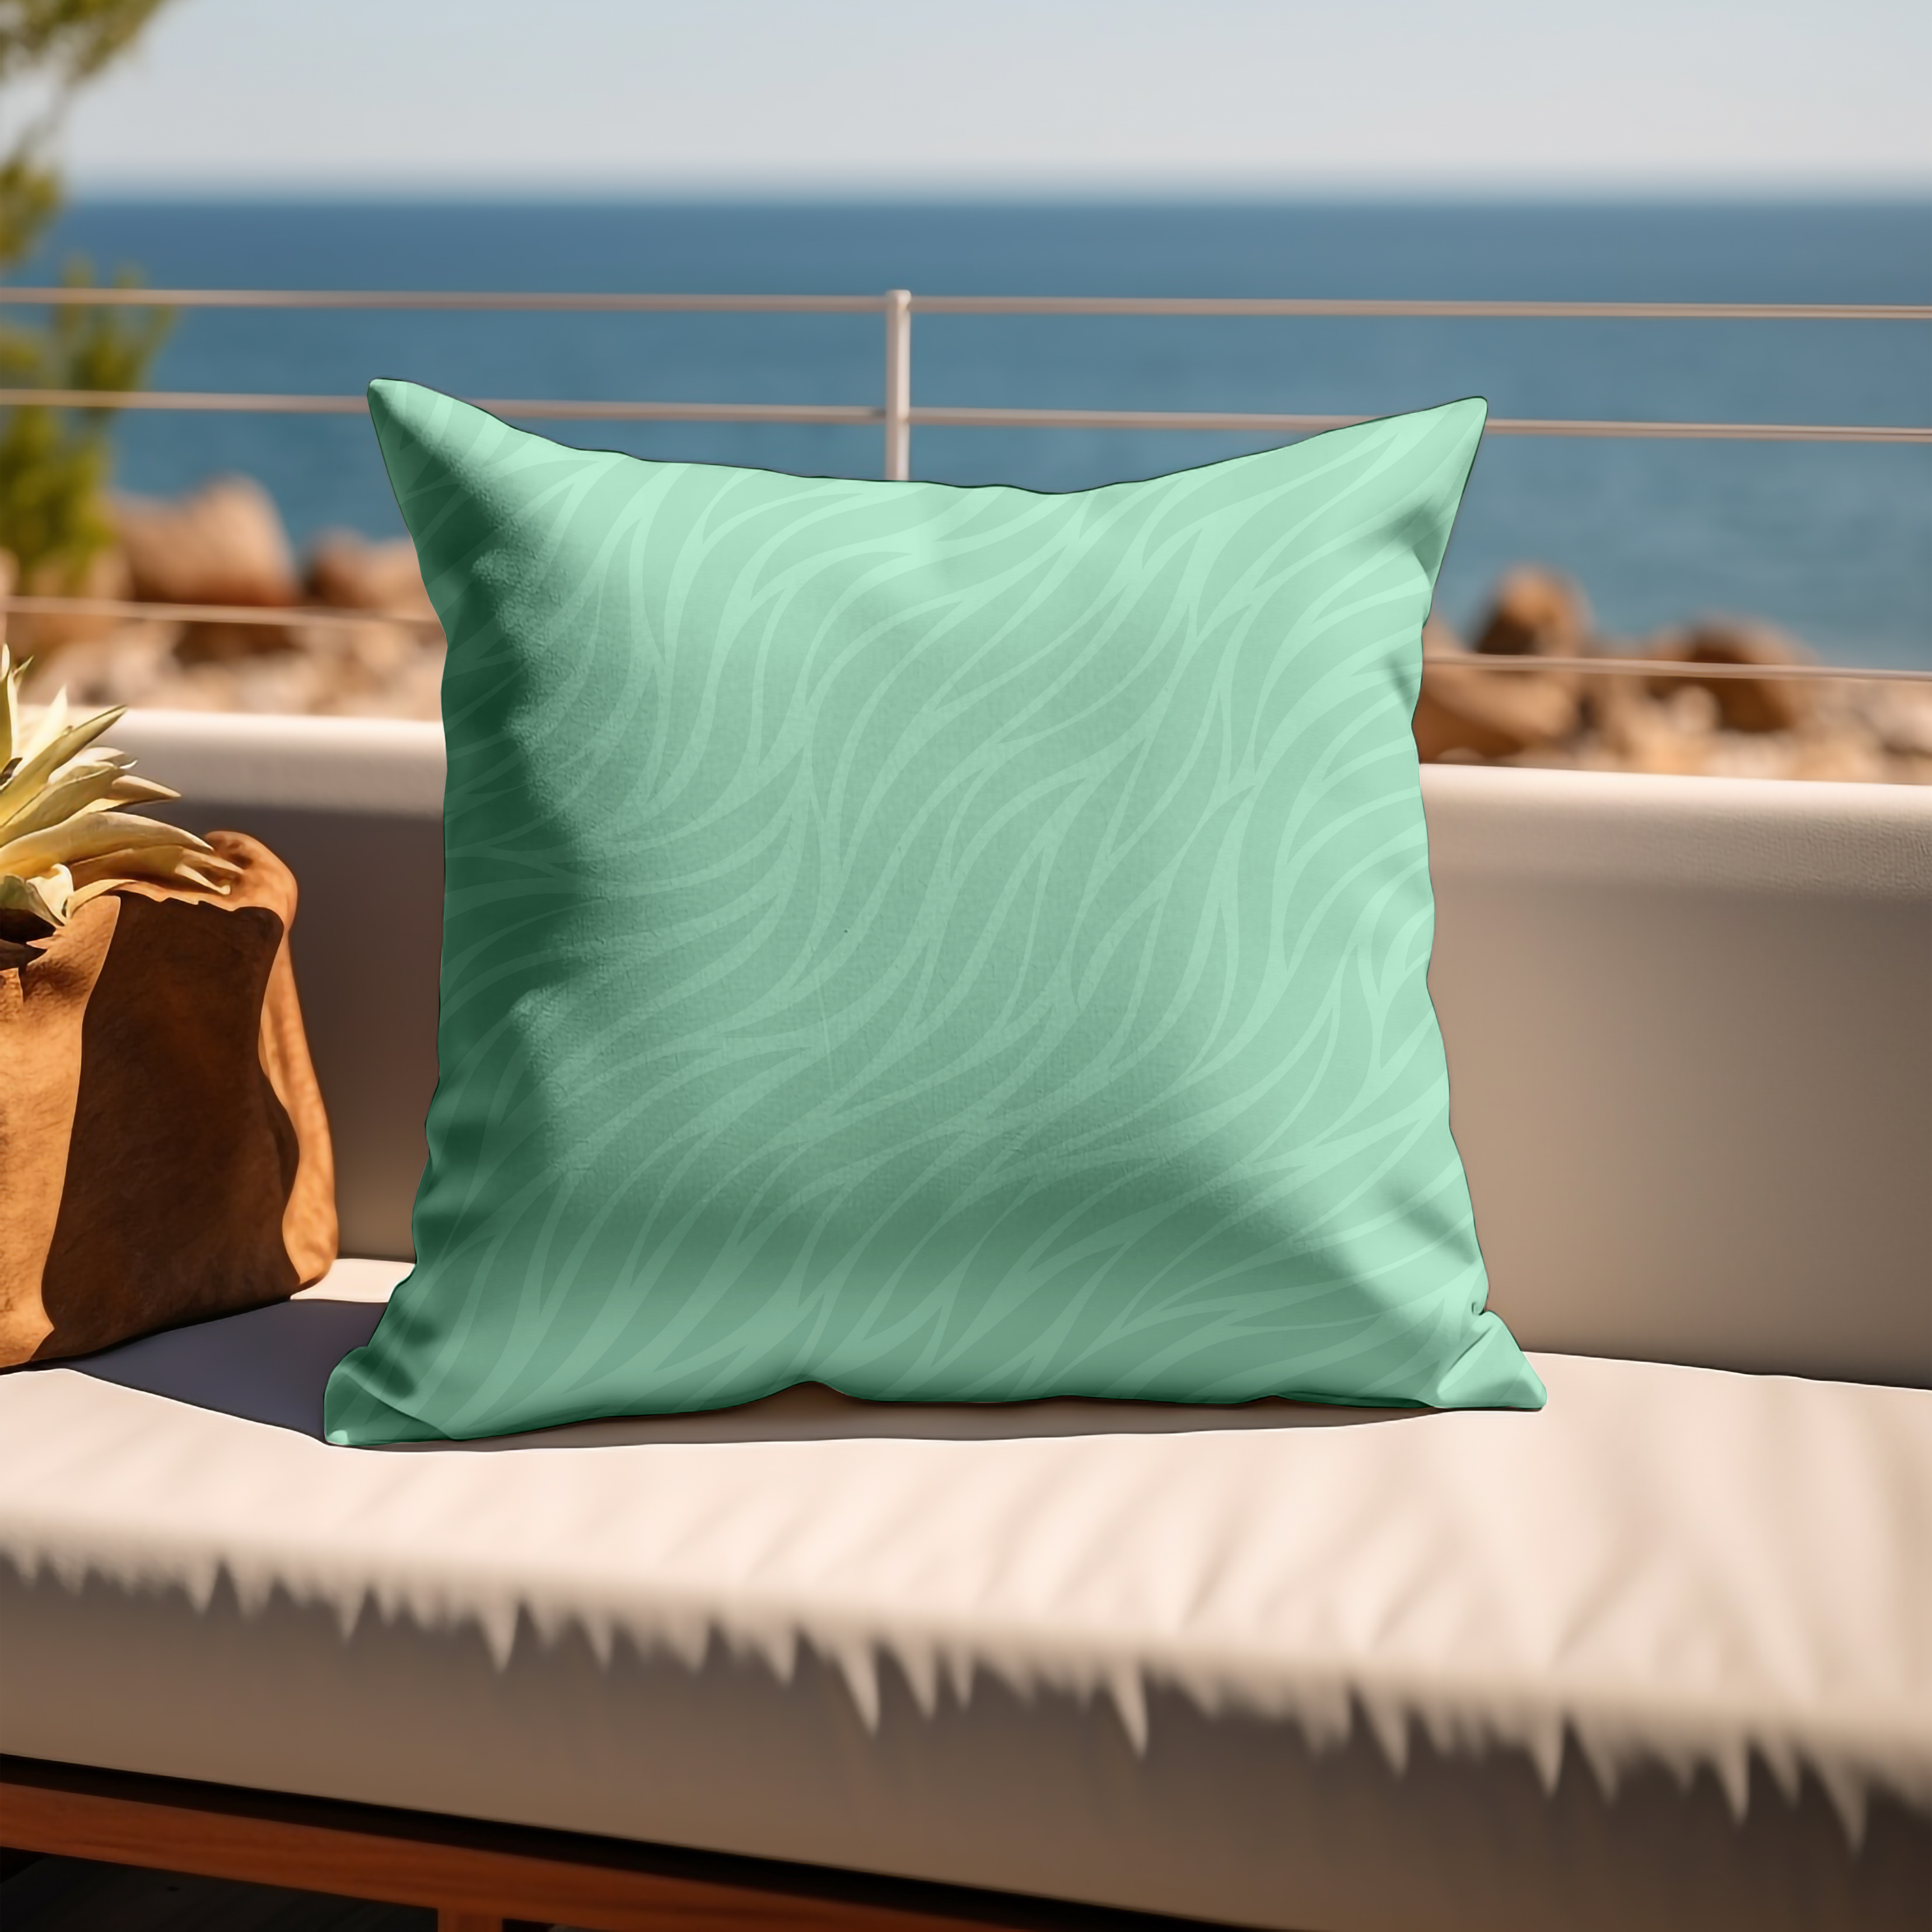 Carnival Glass Green Waves Outdoor Pillow